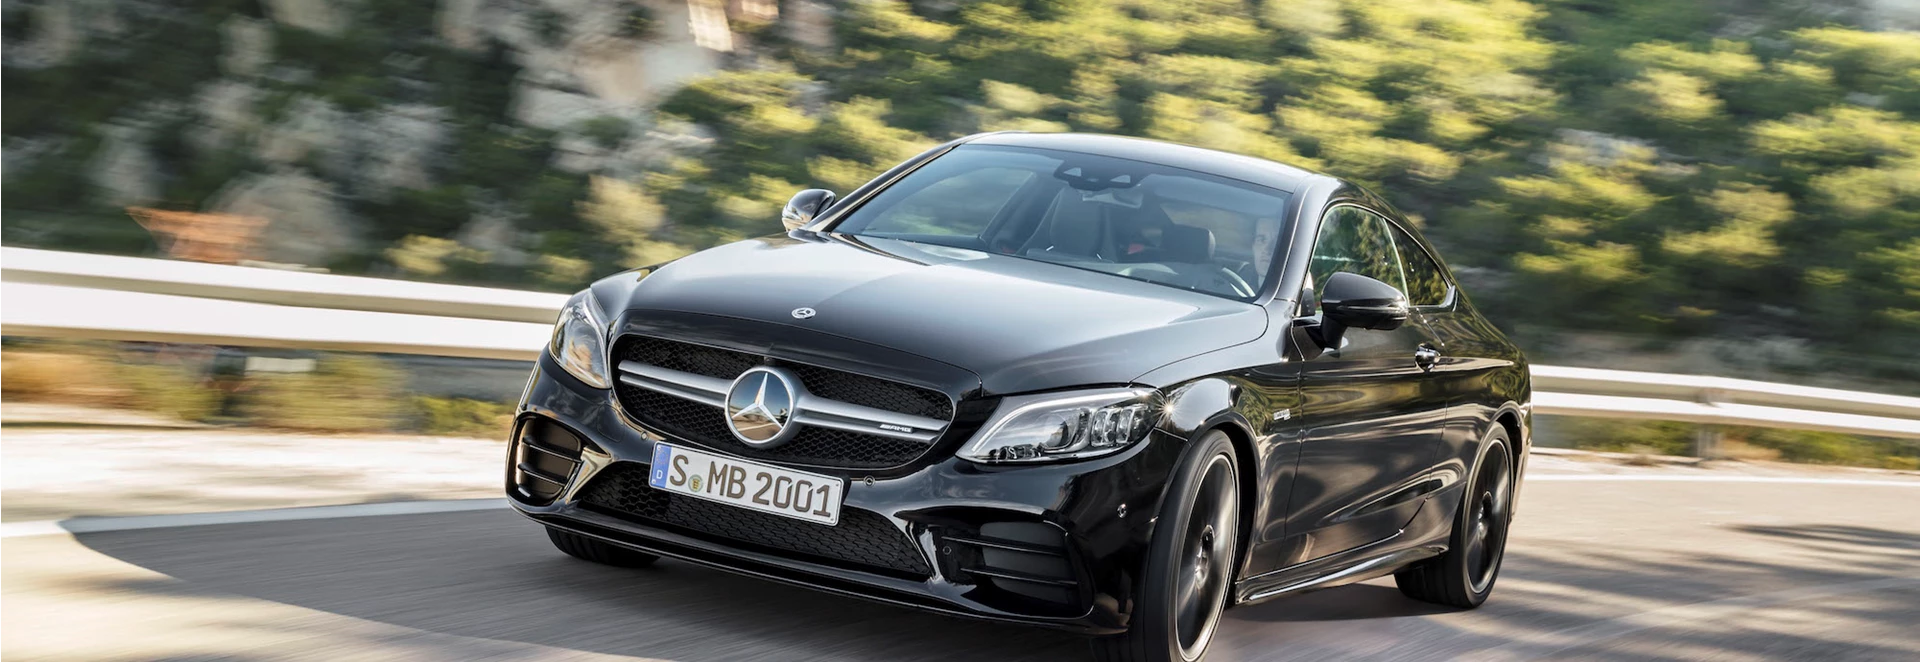 Order books open for updated Mercedes C-Class Coupe and Cabriolet